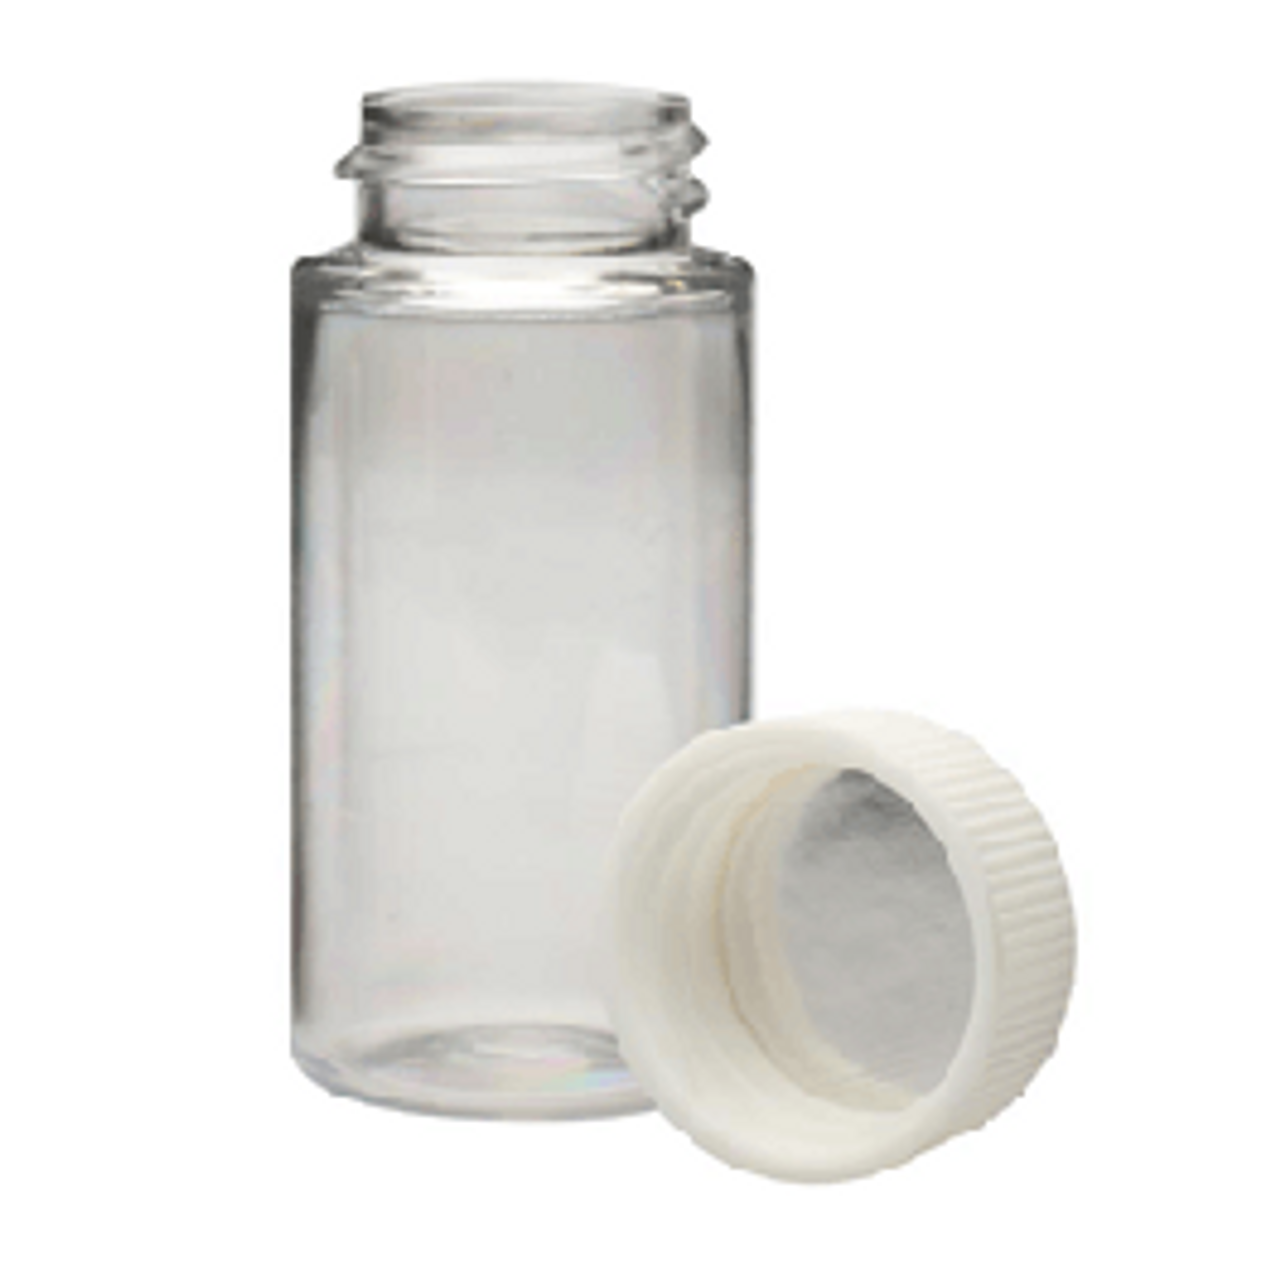 WHEATON® 20mL LS Scintillation Vials, PET, 22-400 Thermoset Screw Cap (packed separately), Foil Liner, case/1000